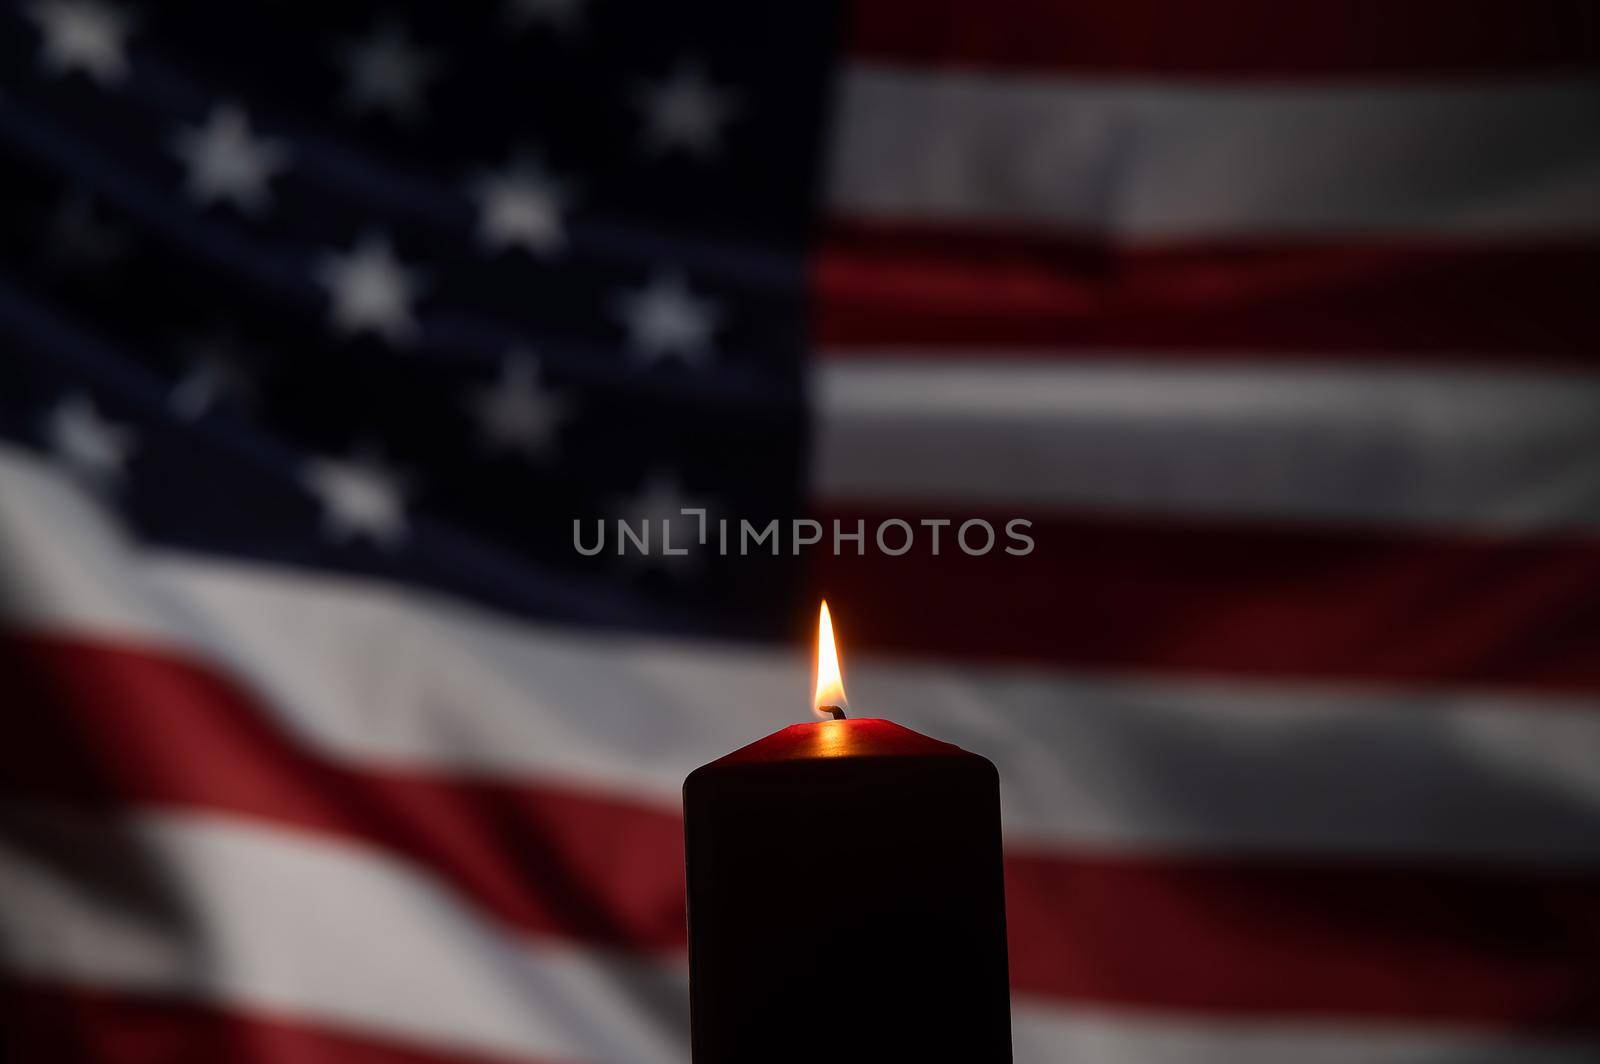 Burning candle against the background of the waving flag of the united states of america in the dark